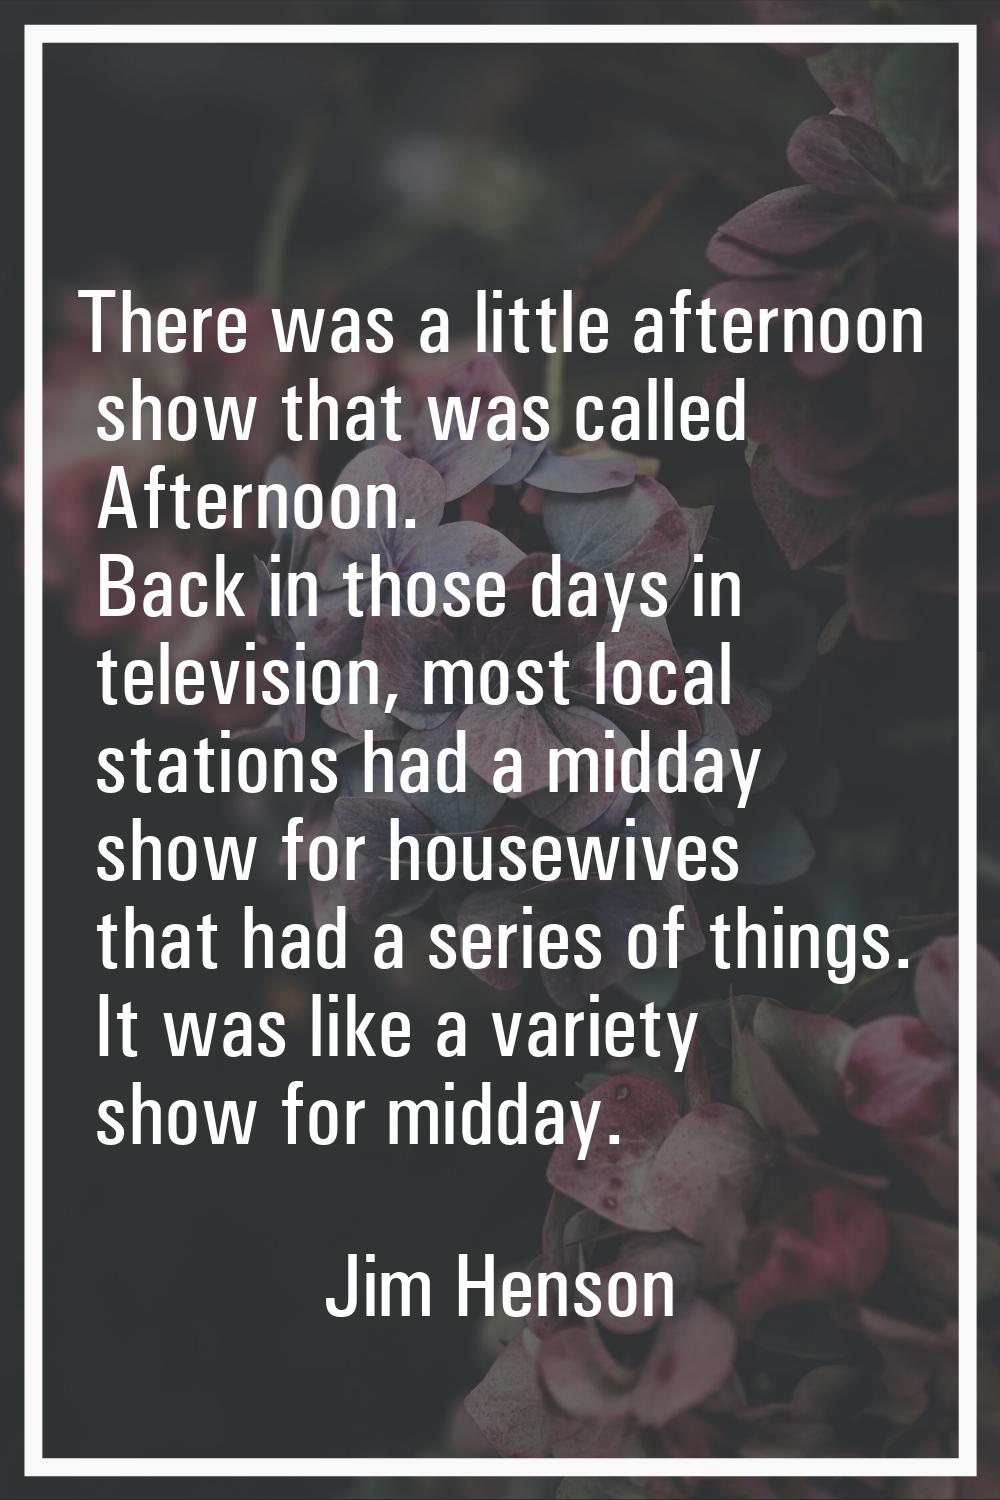 There was a little afternoon show that was called Afternoon. Back in those days in television, most